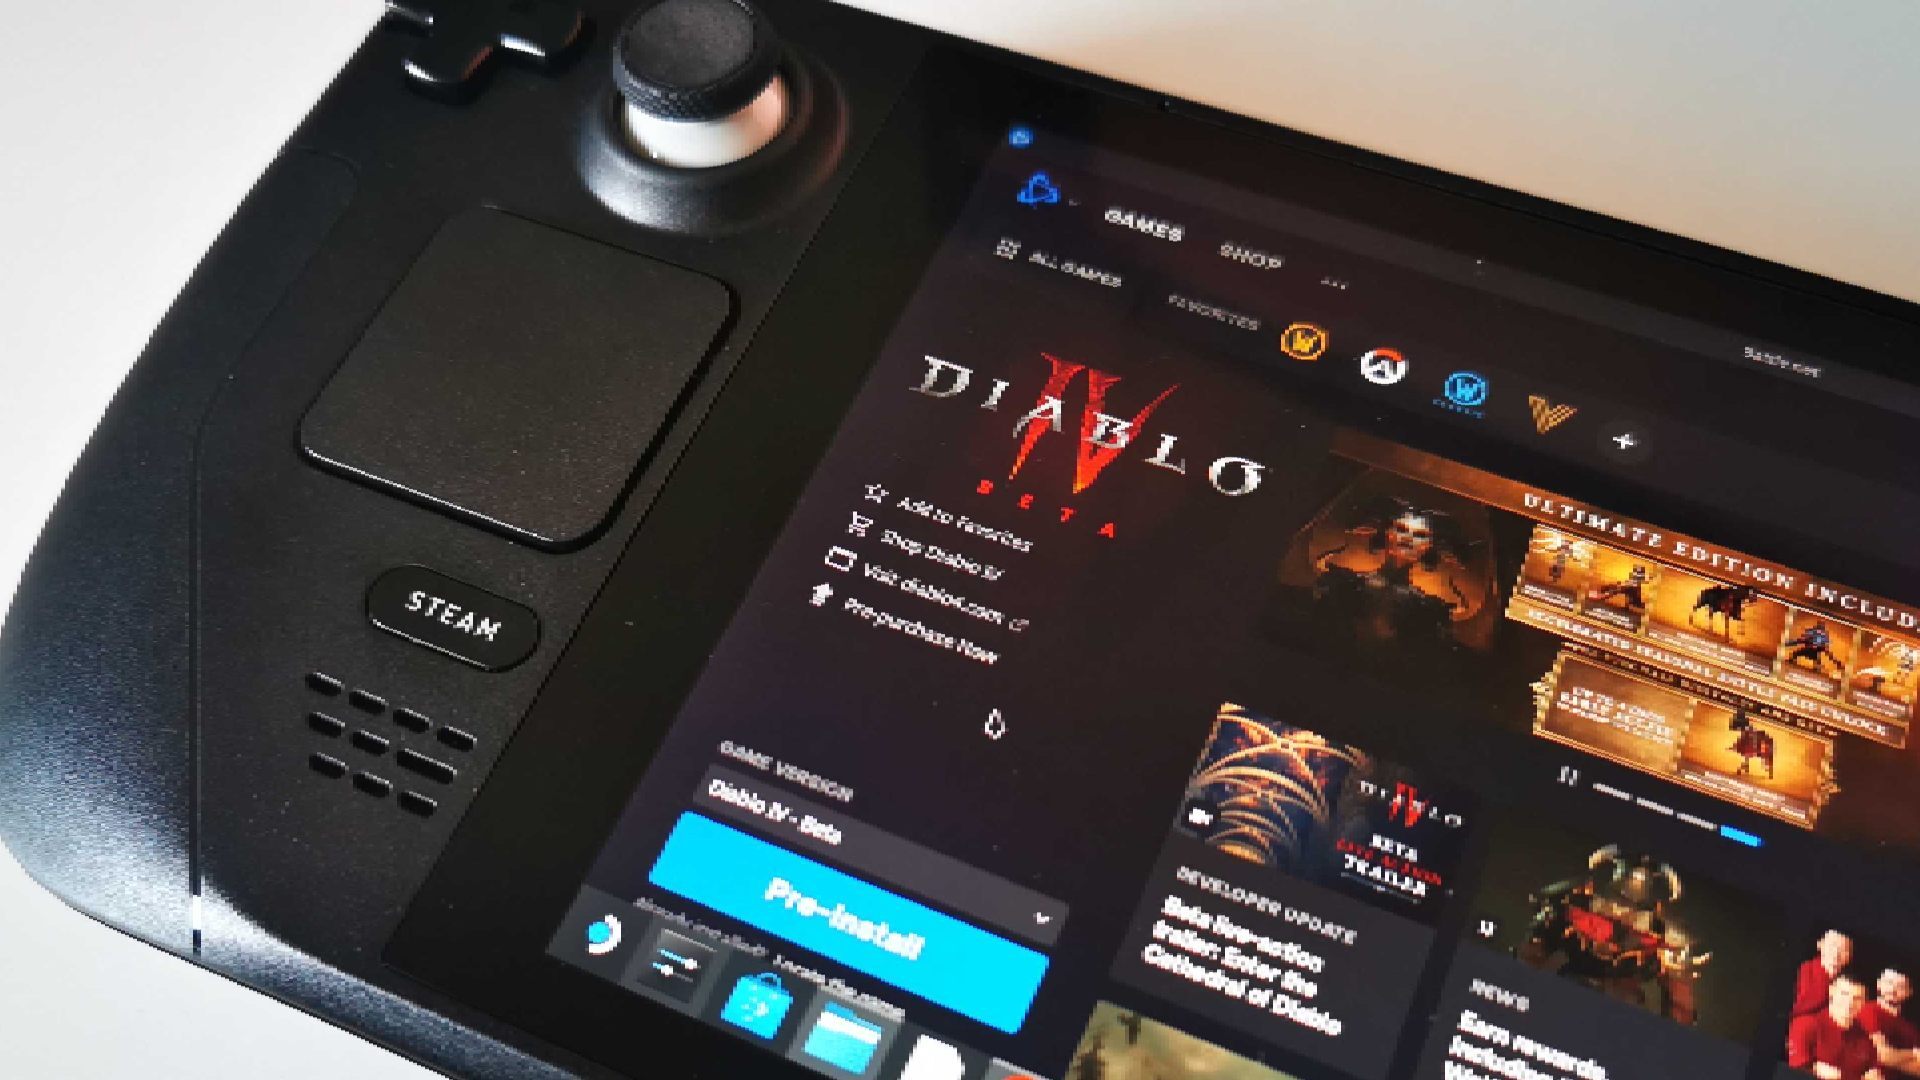 Get Battle.net, EA, Epic Games and more on Steam Deck the easy way